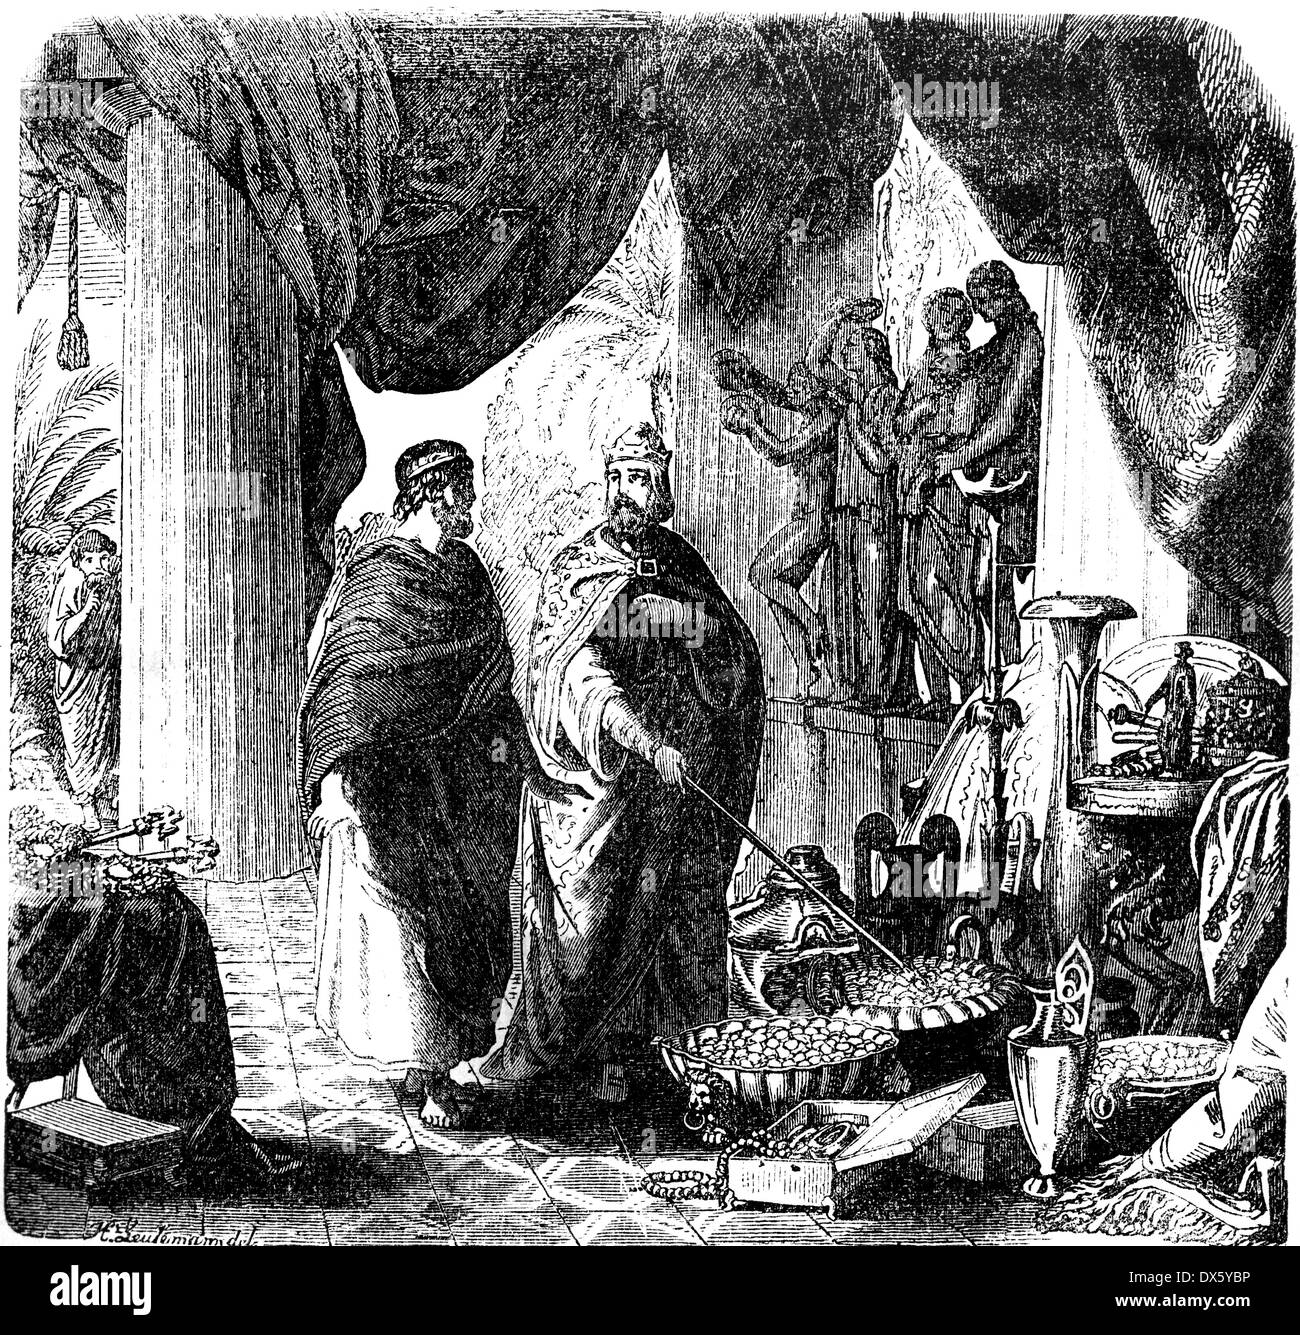 King Croesus and Solon, illustration from book dated 1878 Stock Photo